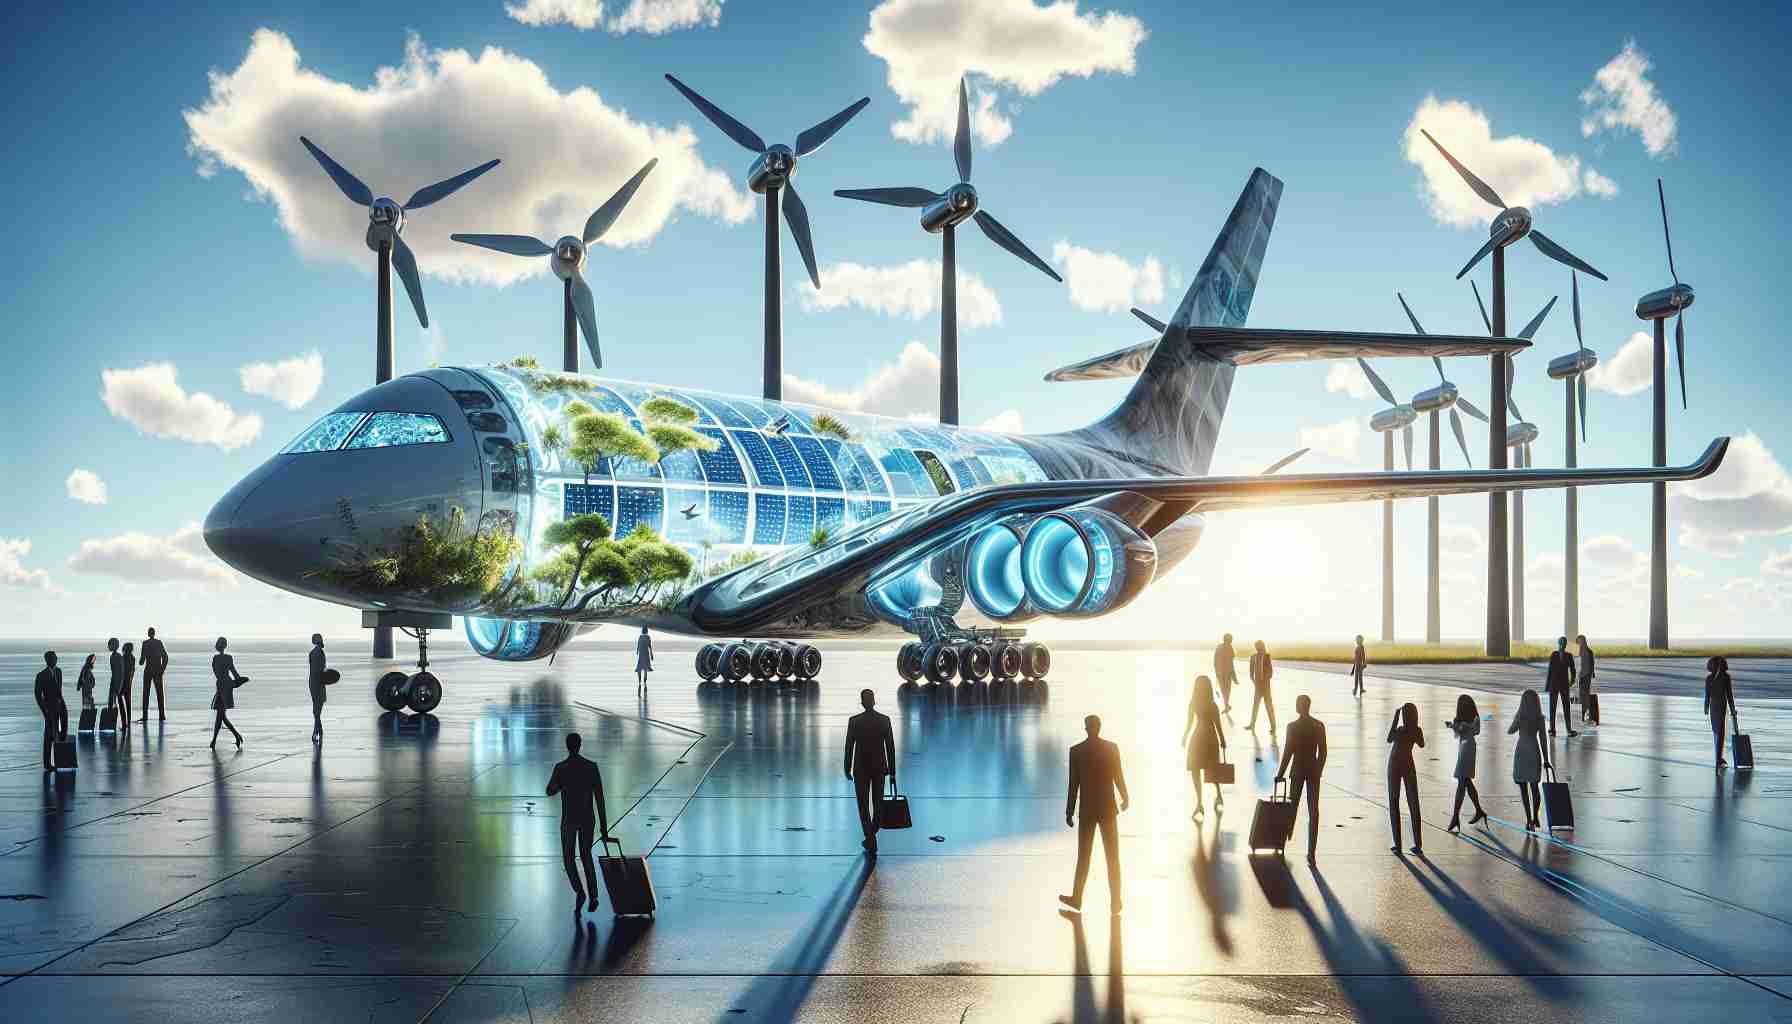 A high-definition, realistic image showcasing the revolution of aviation through innovative, sustainable solutions. This image should include a sleek, modern aircraft, uniquely designed to emphasize eco-friendliness and energy efficiency. Perhaps solar panels carefully integrated into the aircraft's wings, wind turbines that double as engines, or aerodynamic shapes that contribute to fuel efficiency. The backdrop could be a vibrant blue sky dotted with fluffy white clouds, symbolizing a clean, pollution-free atmosphere. People could also be seen interacting with the aircraft, reflecting a diverse range of genders and descents, emphasizing a global commitment to sustainable aviation.